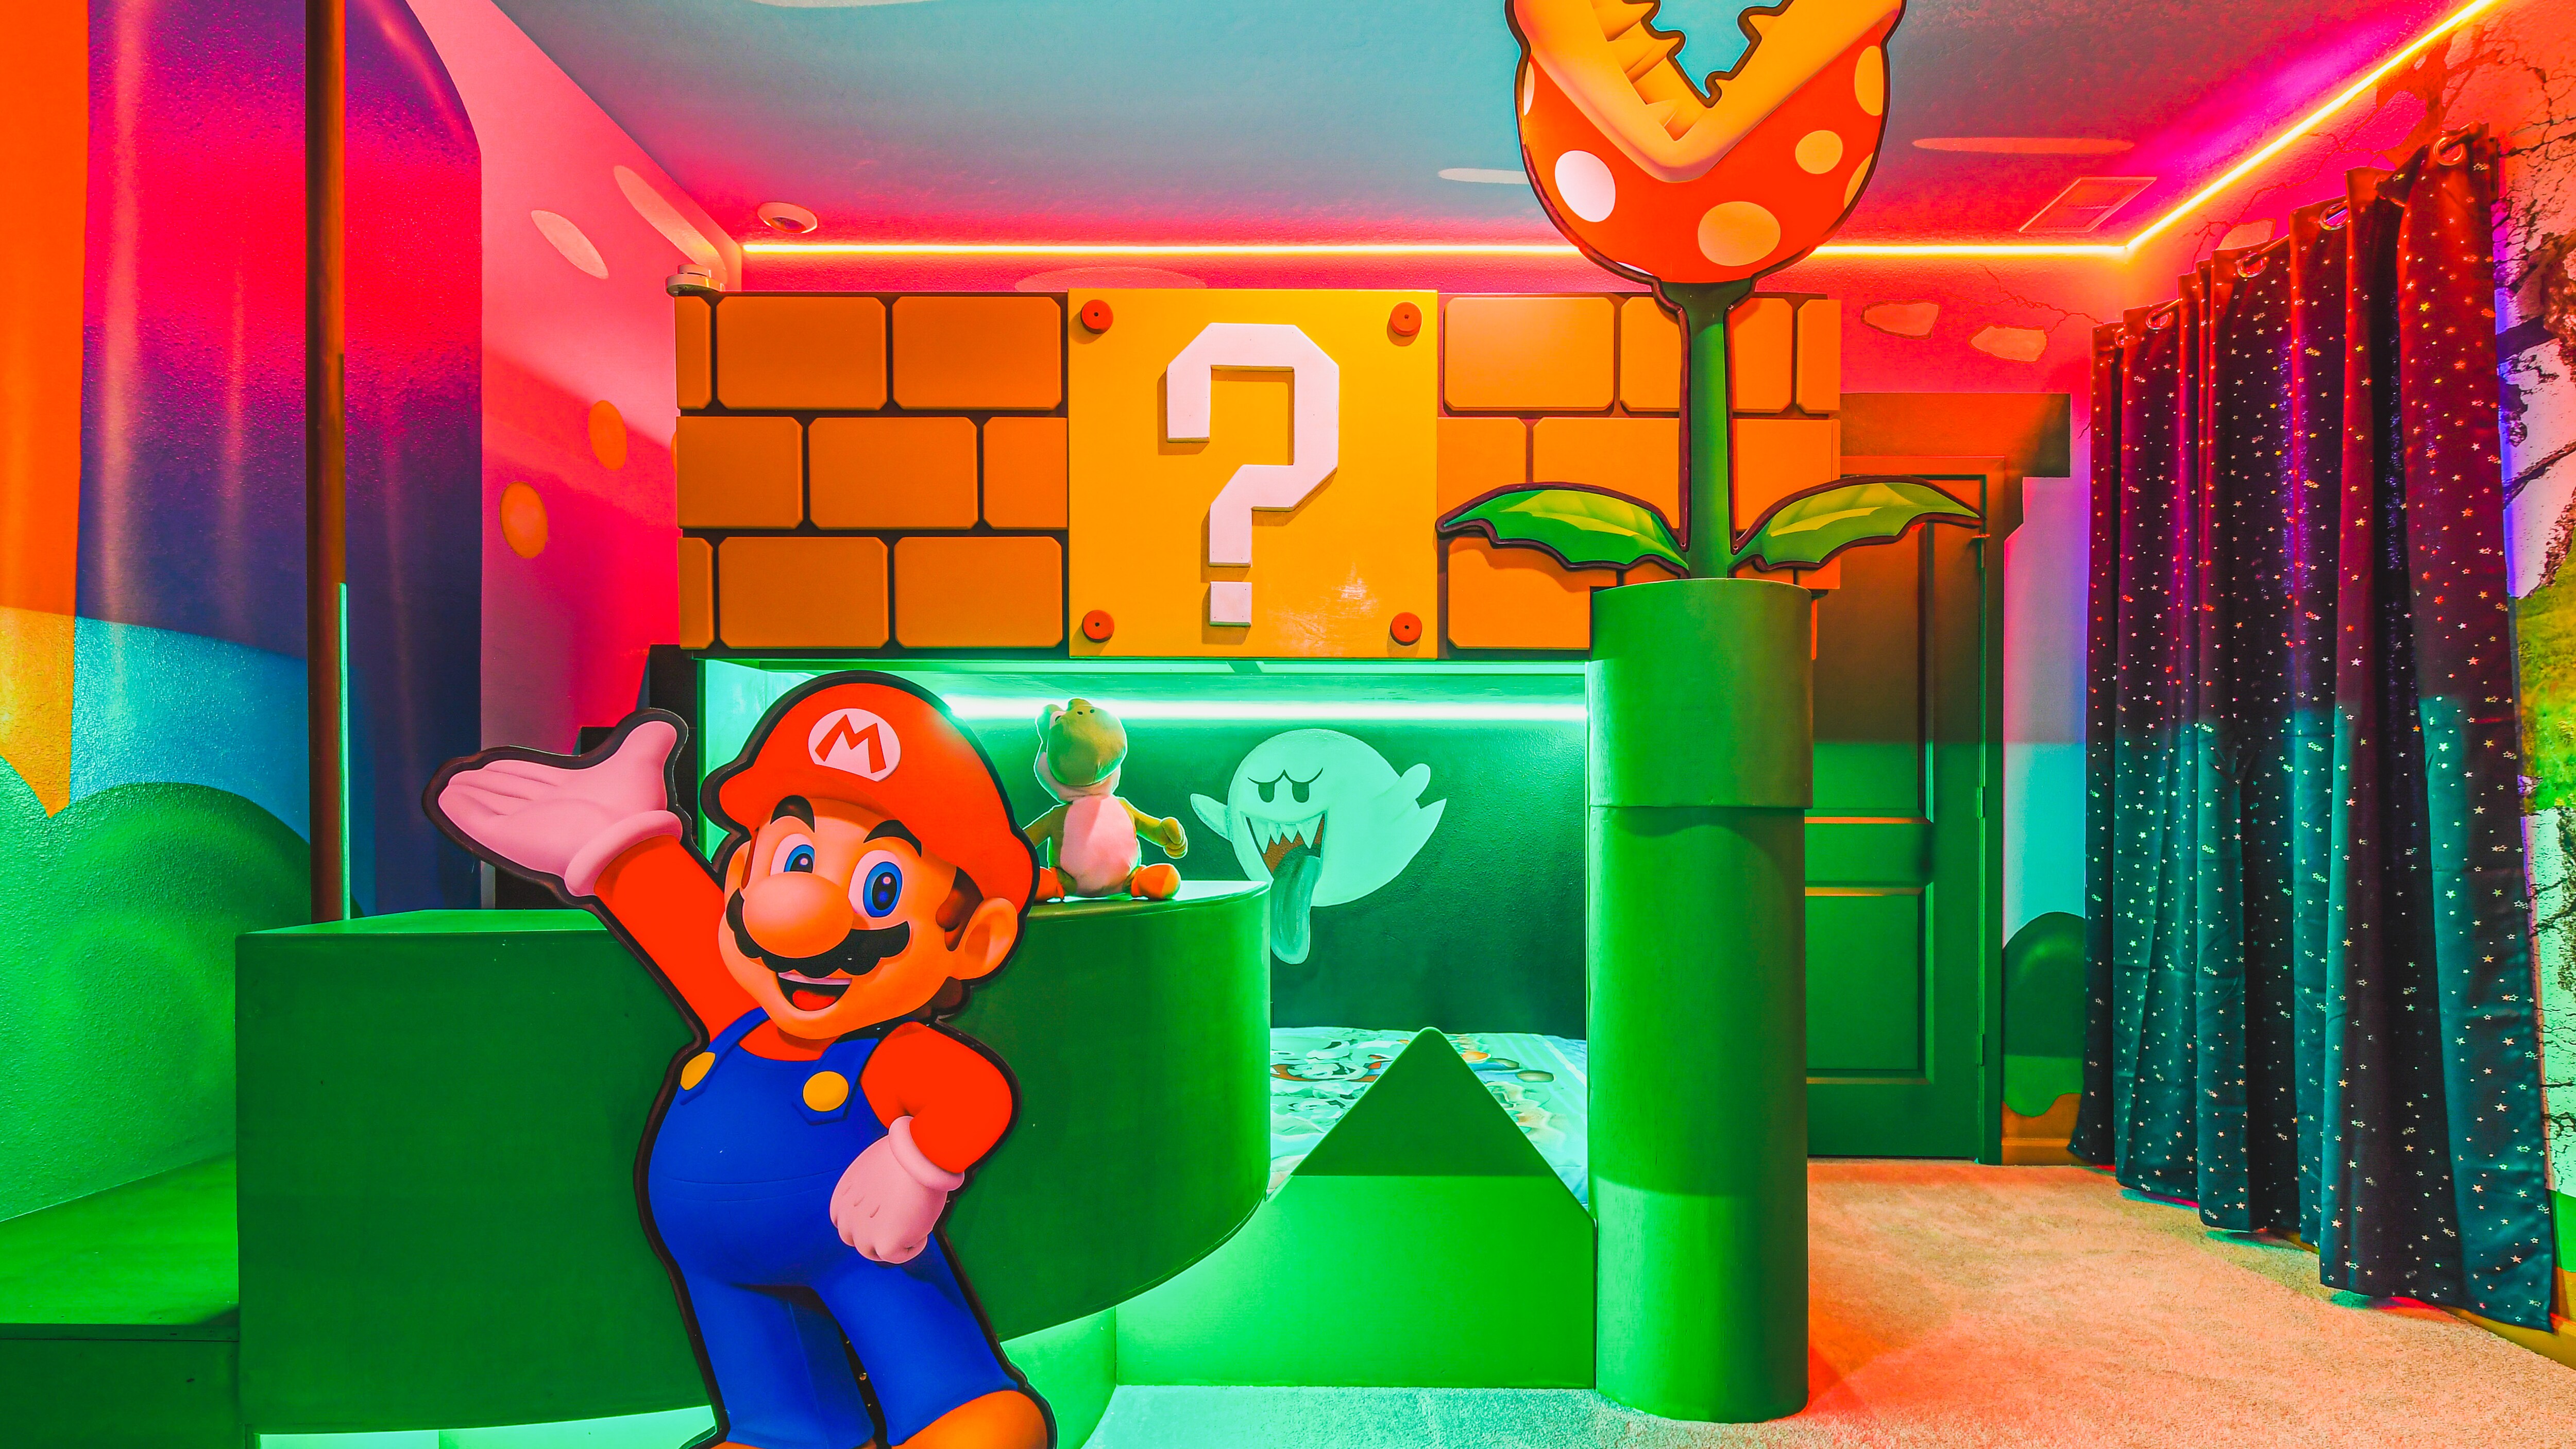 Experience the upstairs bedroom designed with a cool Mario theme.